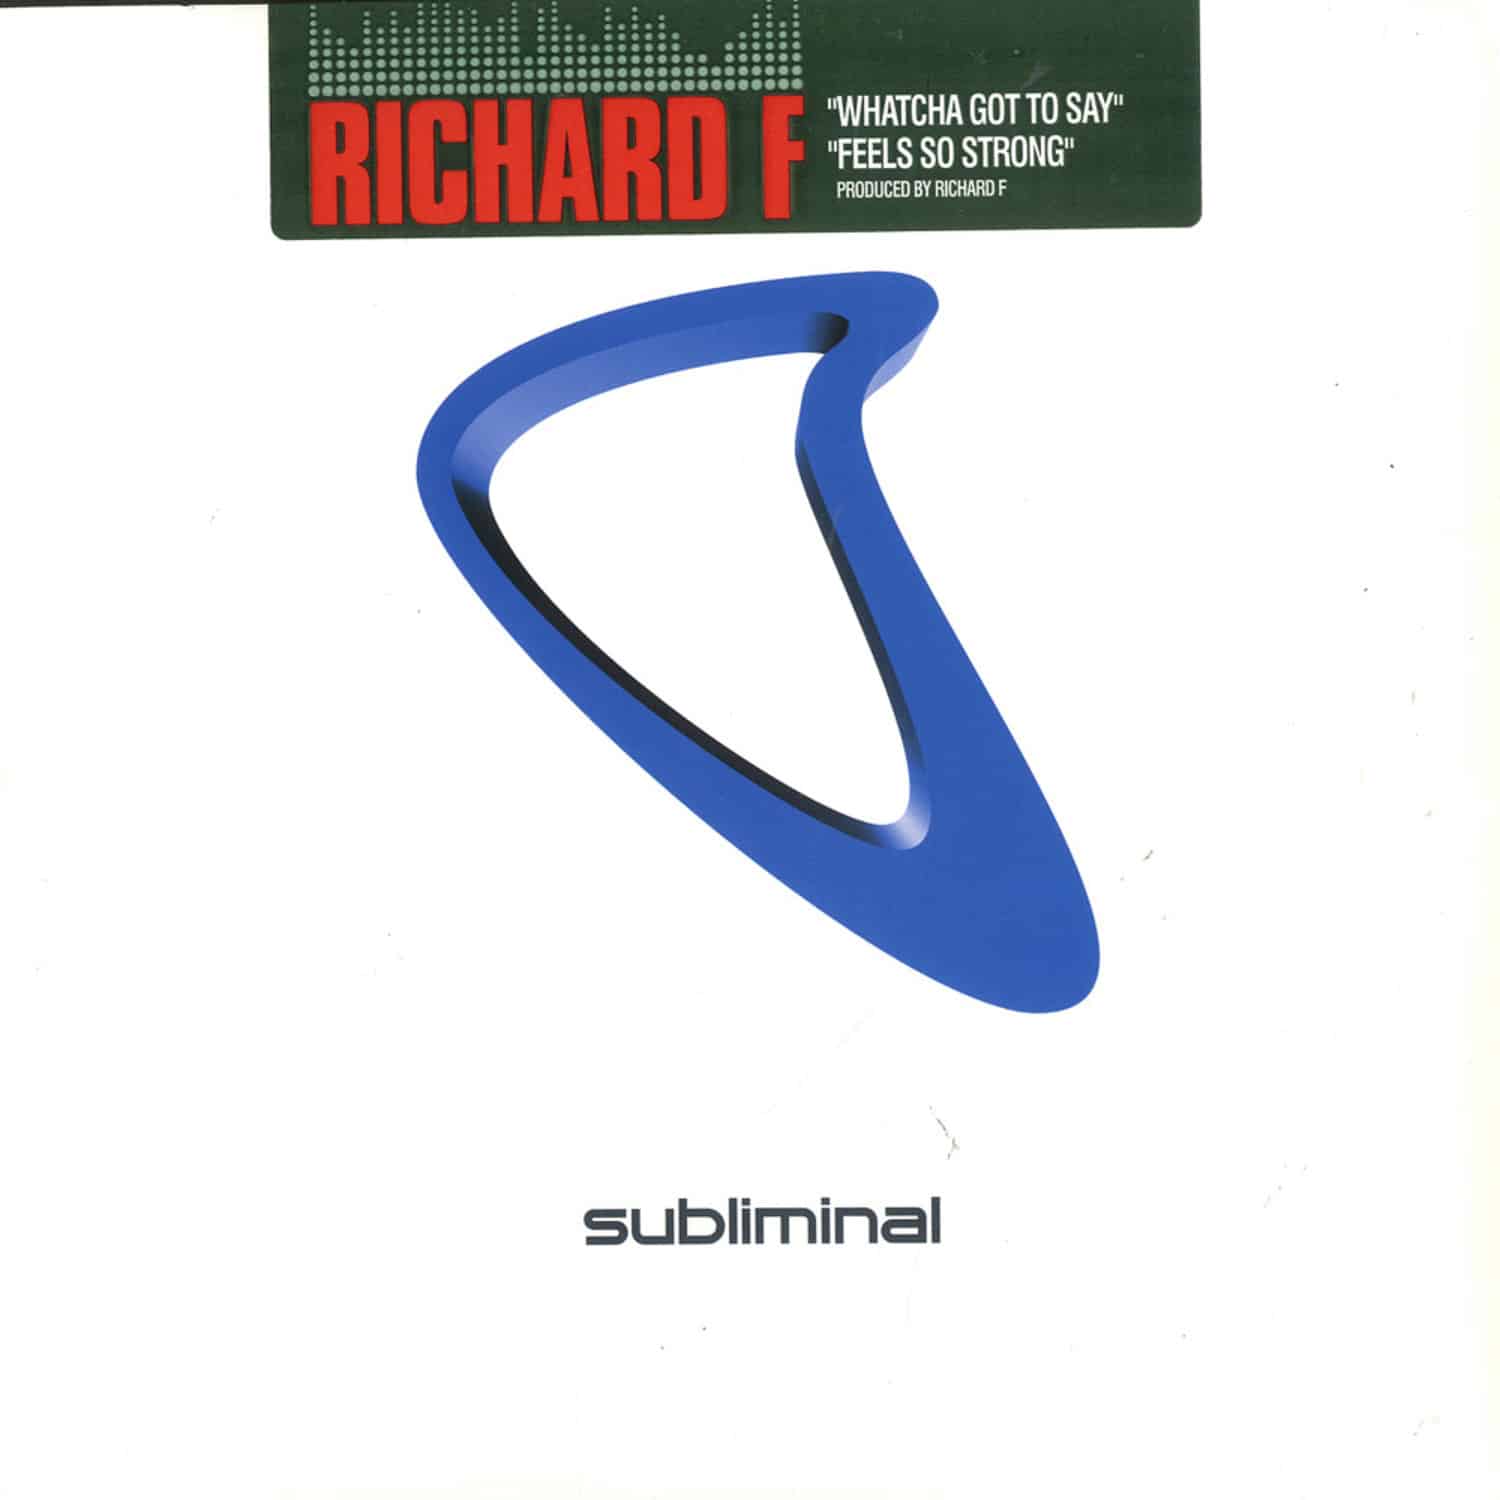 Richard F - WHATCHA GOT TO SAY / FEELS SO STRONG